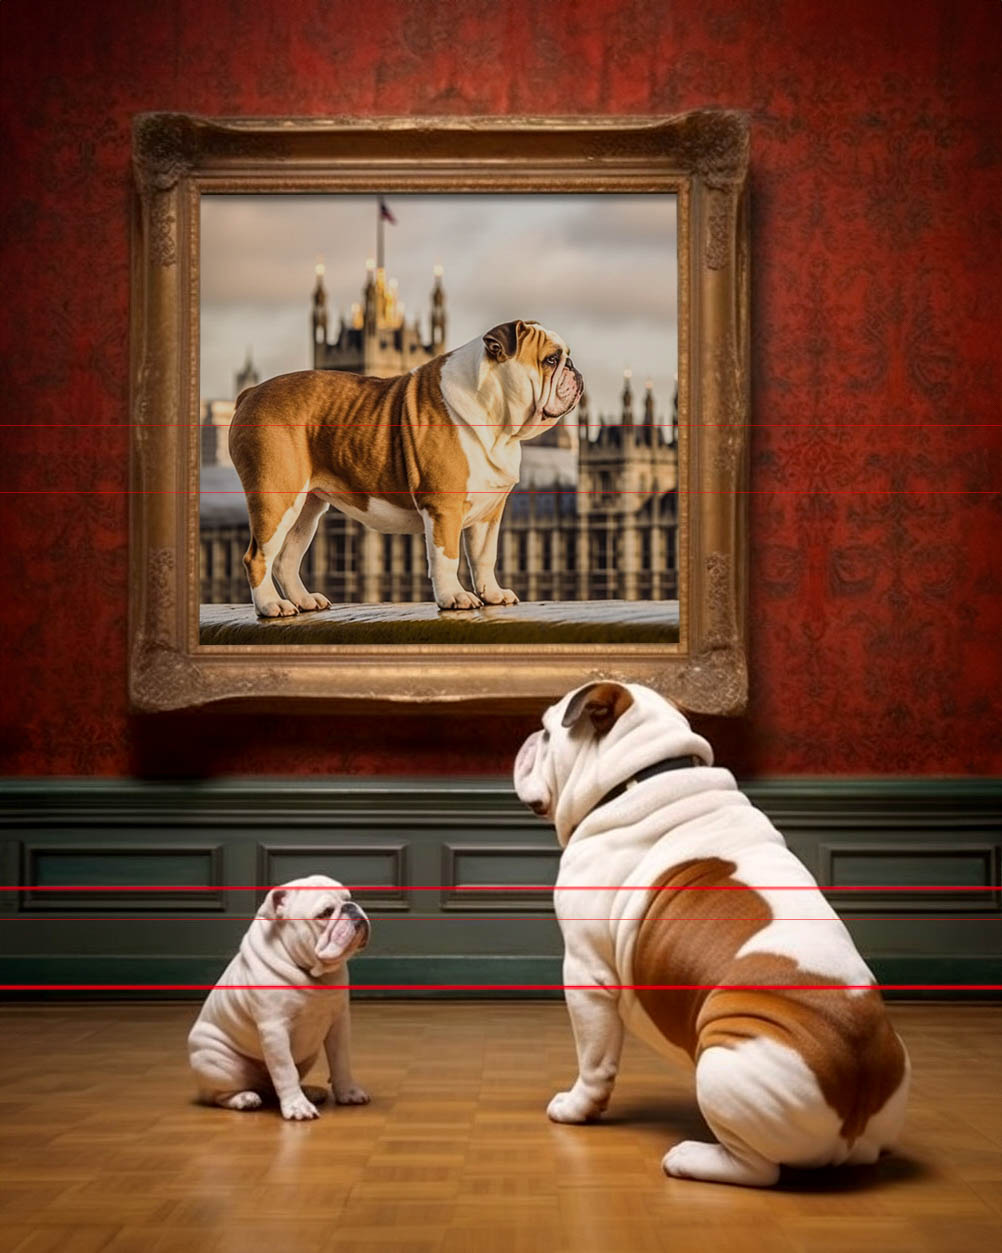 Adult English Bulldog brought its puppy to the museum to see a picture from his proud English heritage, a painting of a portly English Bulldog standing in front of Big Ben hangs on a museum wall in large gilded frame.